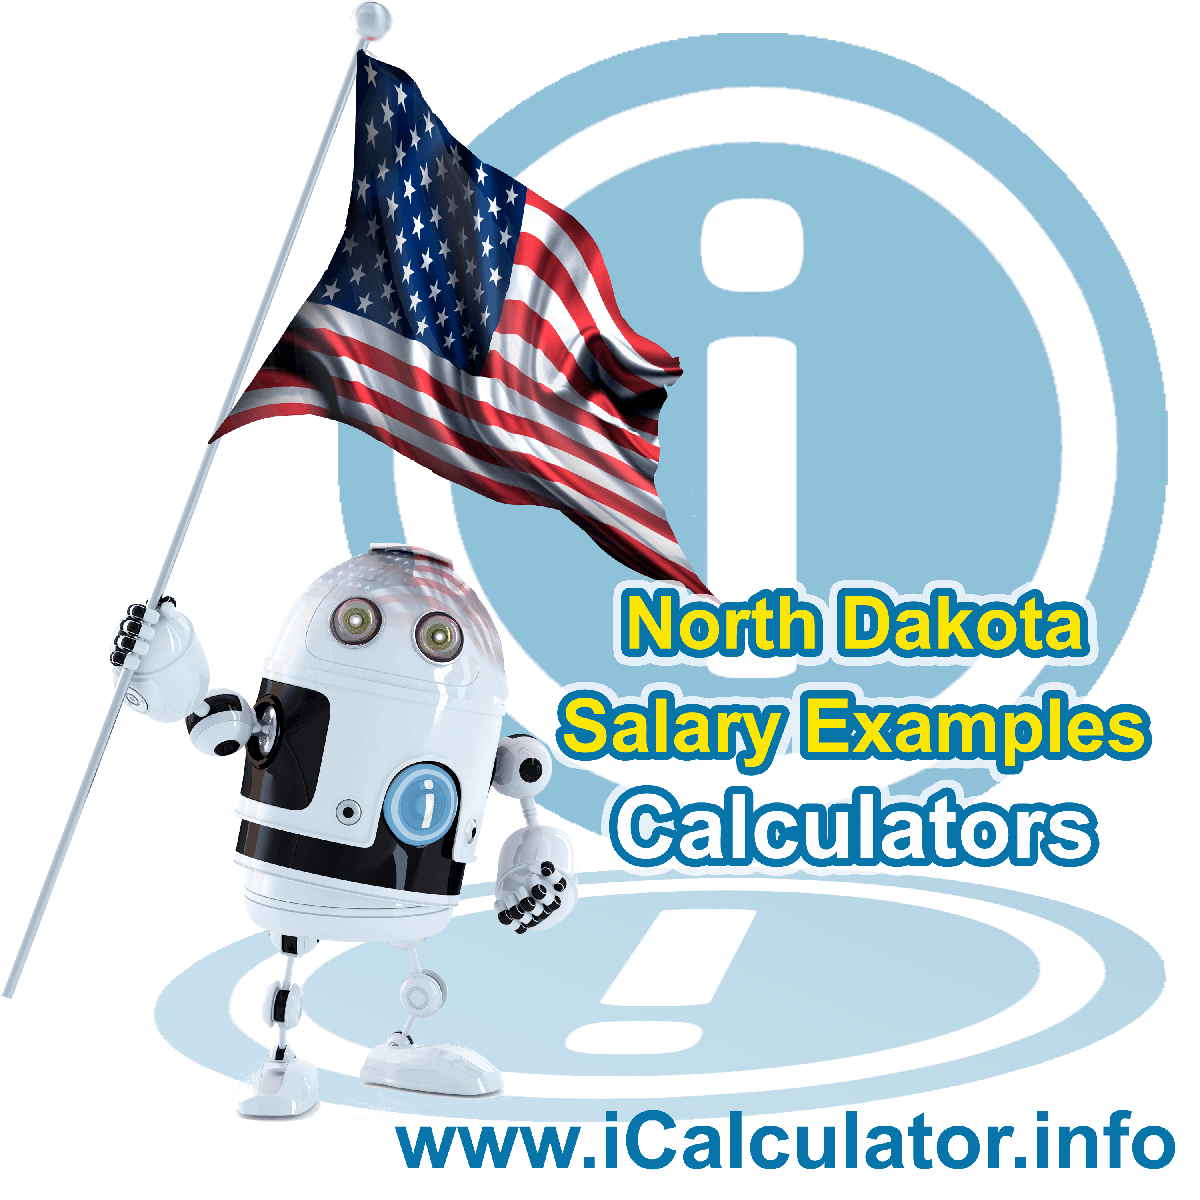 North Dakota Salary Example for $ 60,000.00 in 2023 | iCalculator™ | $ 60,000.00 salary example for employee and employer paying North Dakota State tincome taxes. Detailed salary after tax calculation including North Dakota State Tax, Federal State Tax, Medicare Deductions, Social Security, Capital Gains and other income tax and salary deductions complete with supporting North Dakota state tax tables 